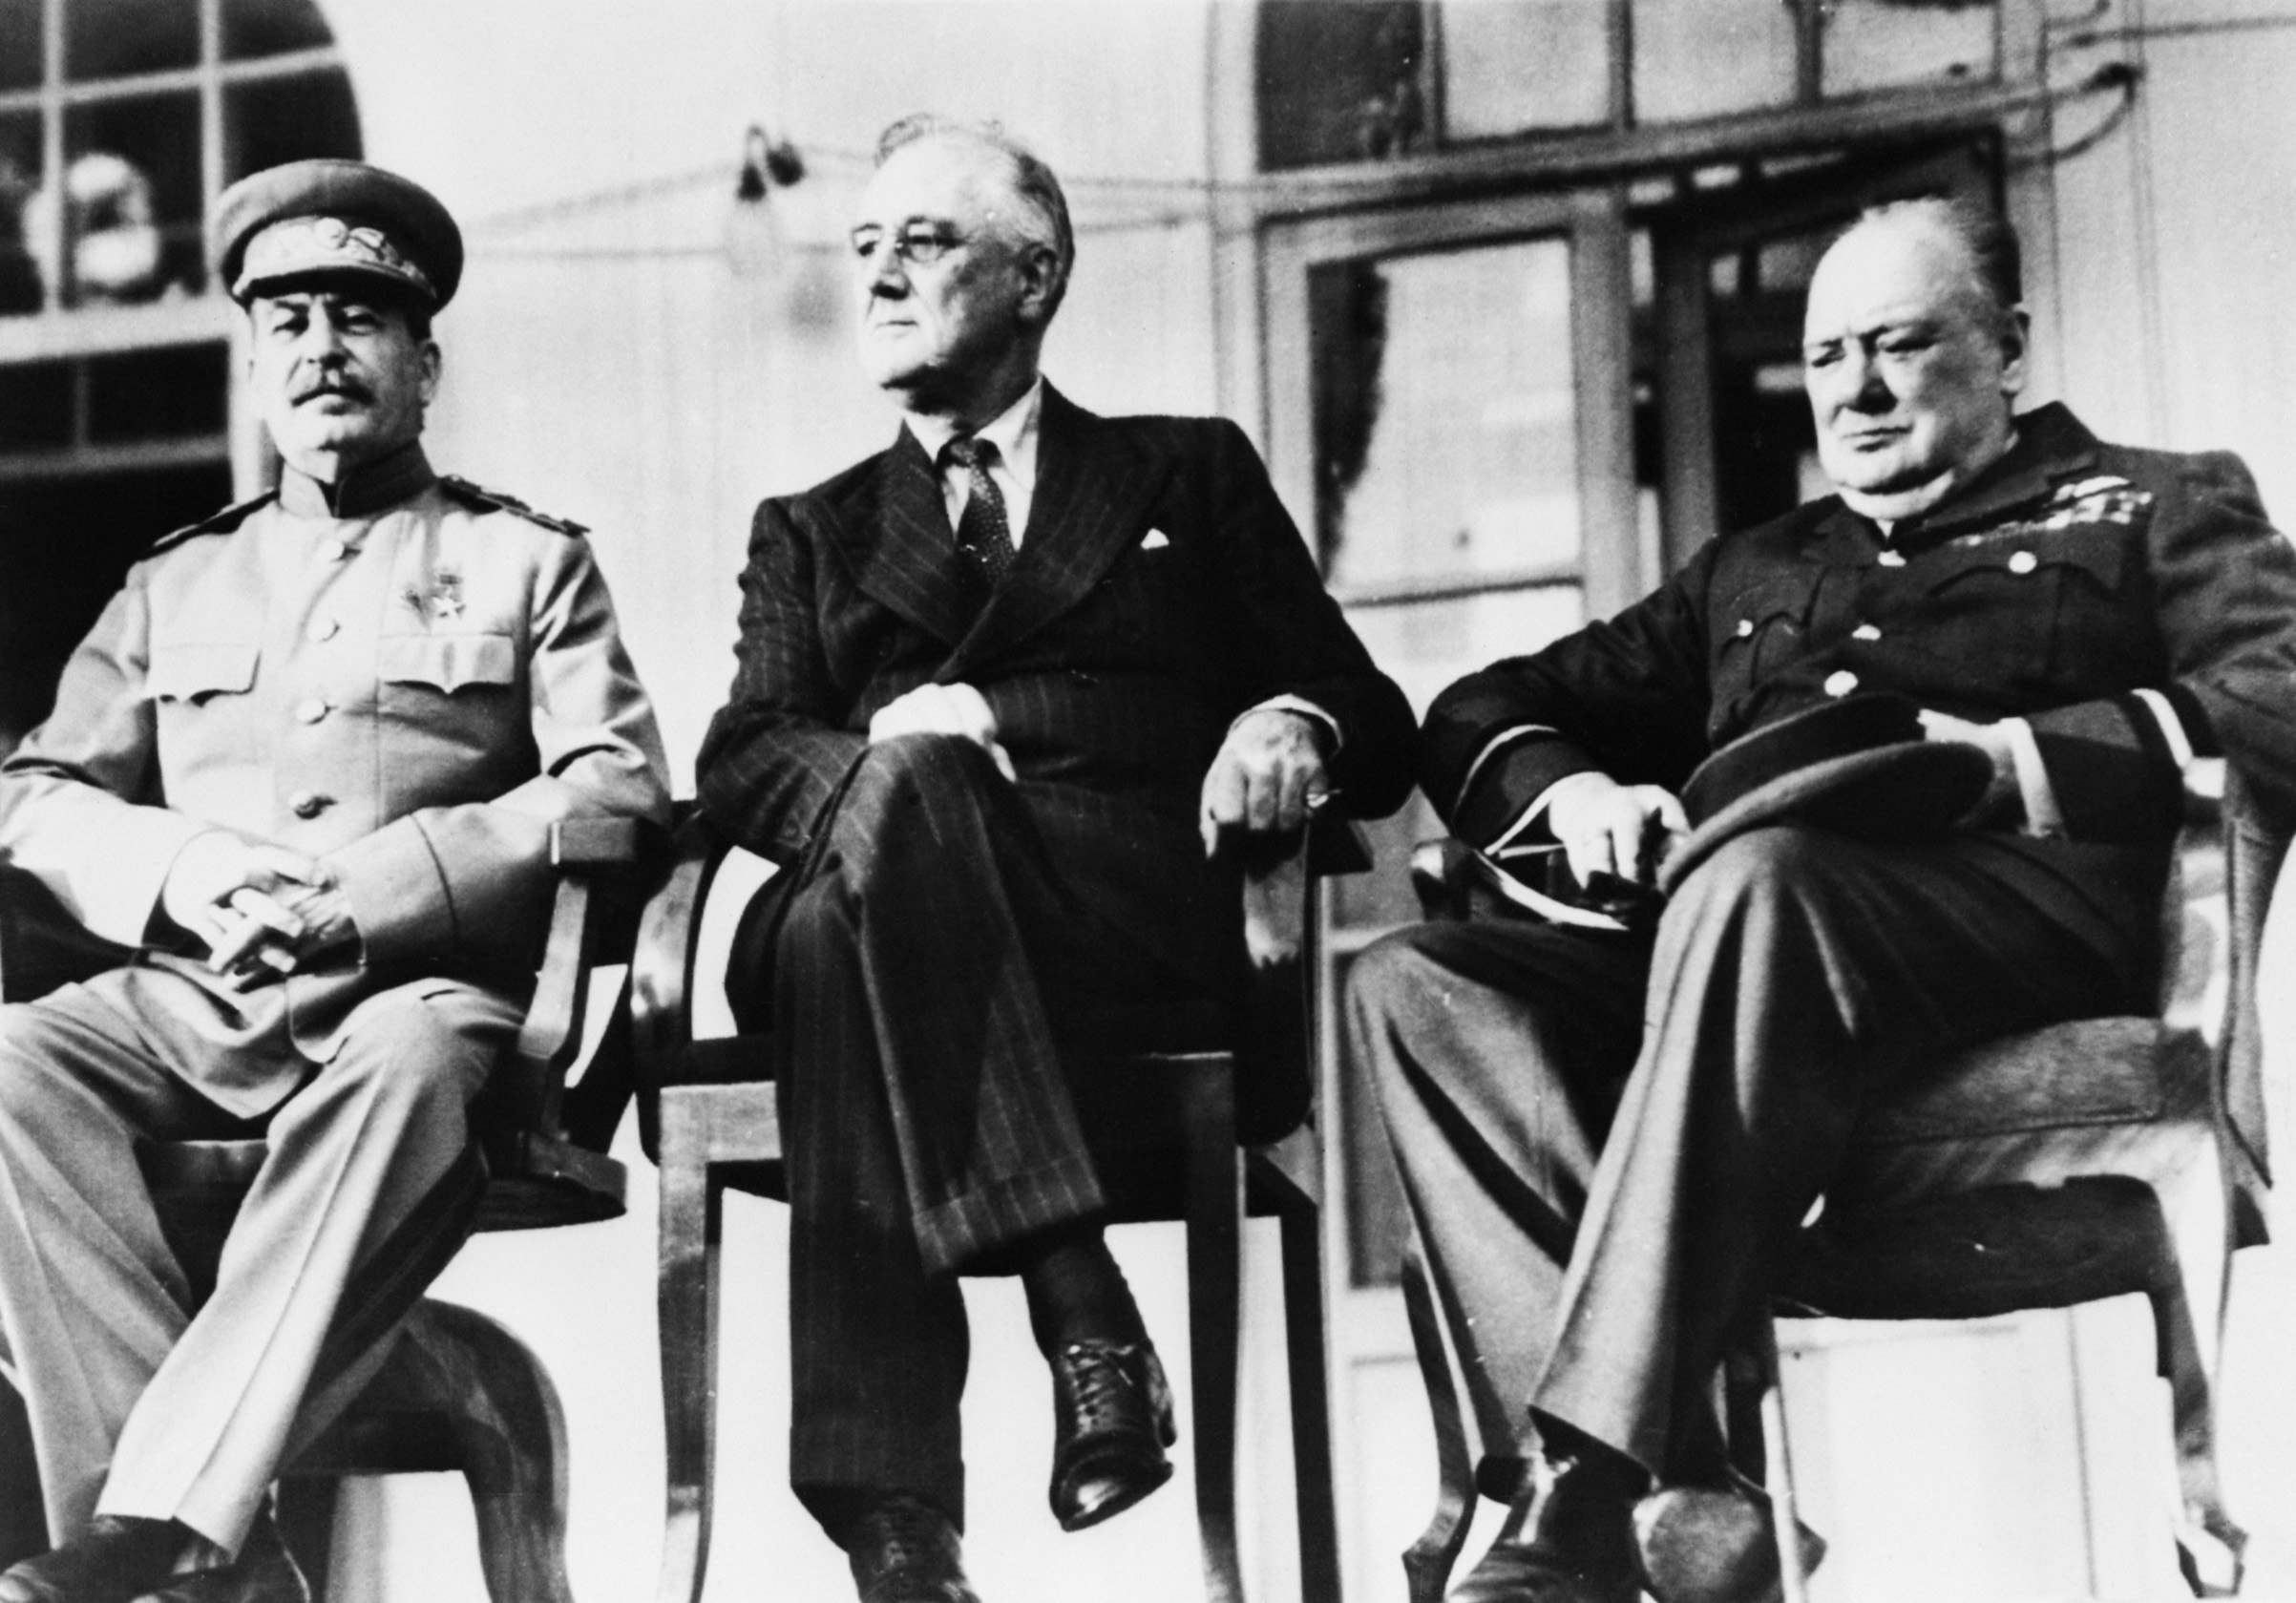 The historic meeting of the 'Big Three' in Teheran, Dec. 1943. Left to right: Soviet dictator Marshal Joseph Stalin (1879-1953), U.S President Franklin Delano Roosevelt (1882-1945) and British Prime Minister Winston Churchill (1874-1965). (Getty Images)